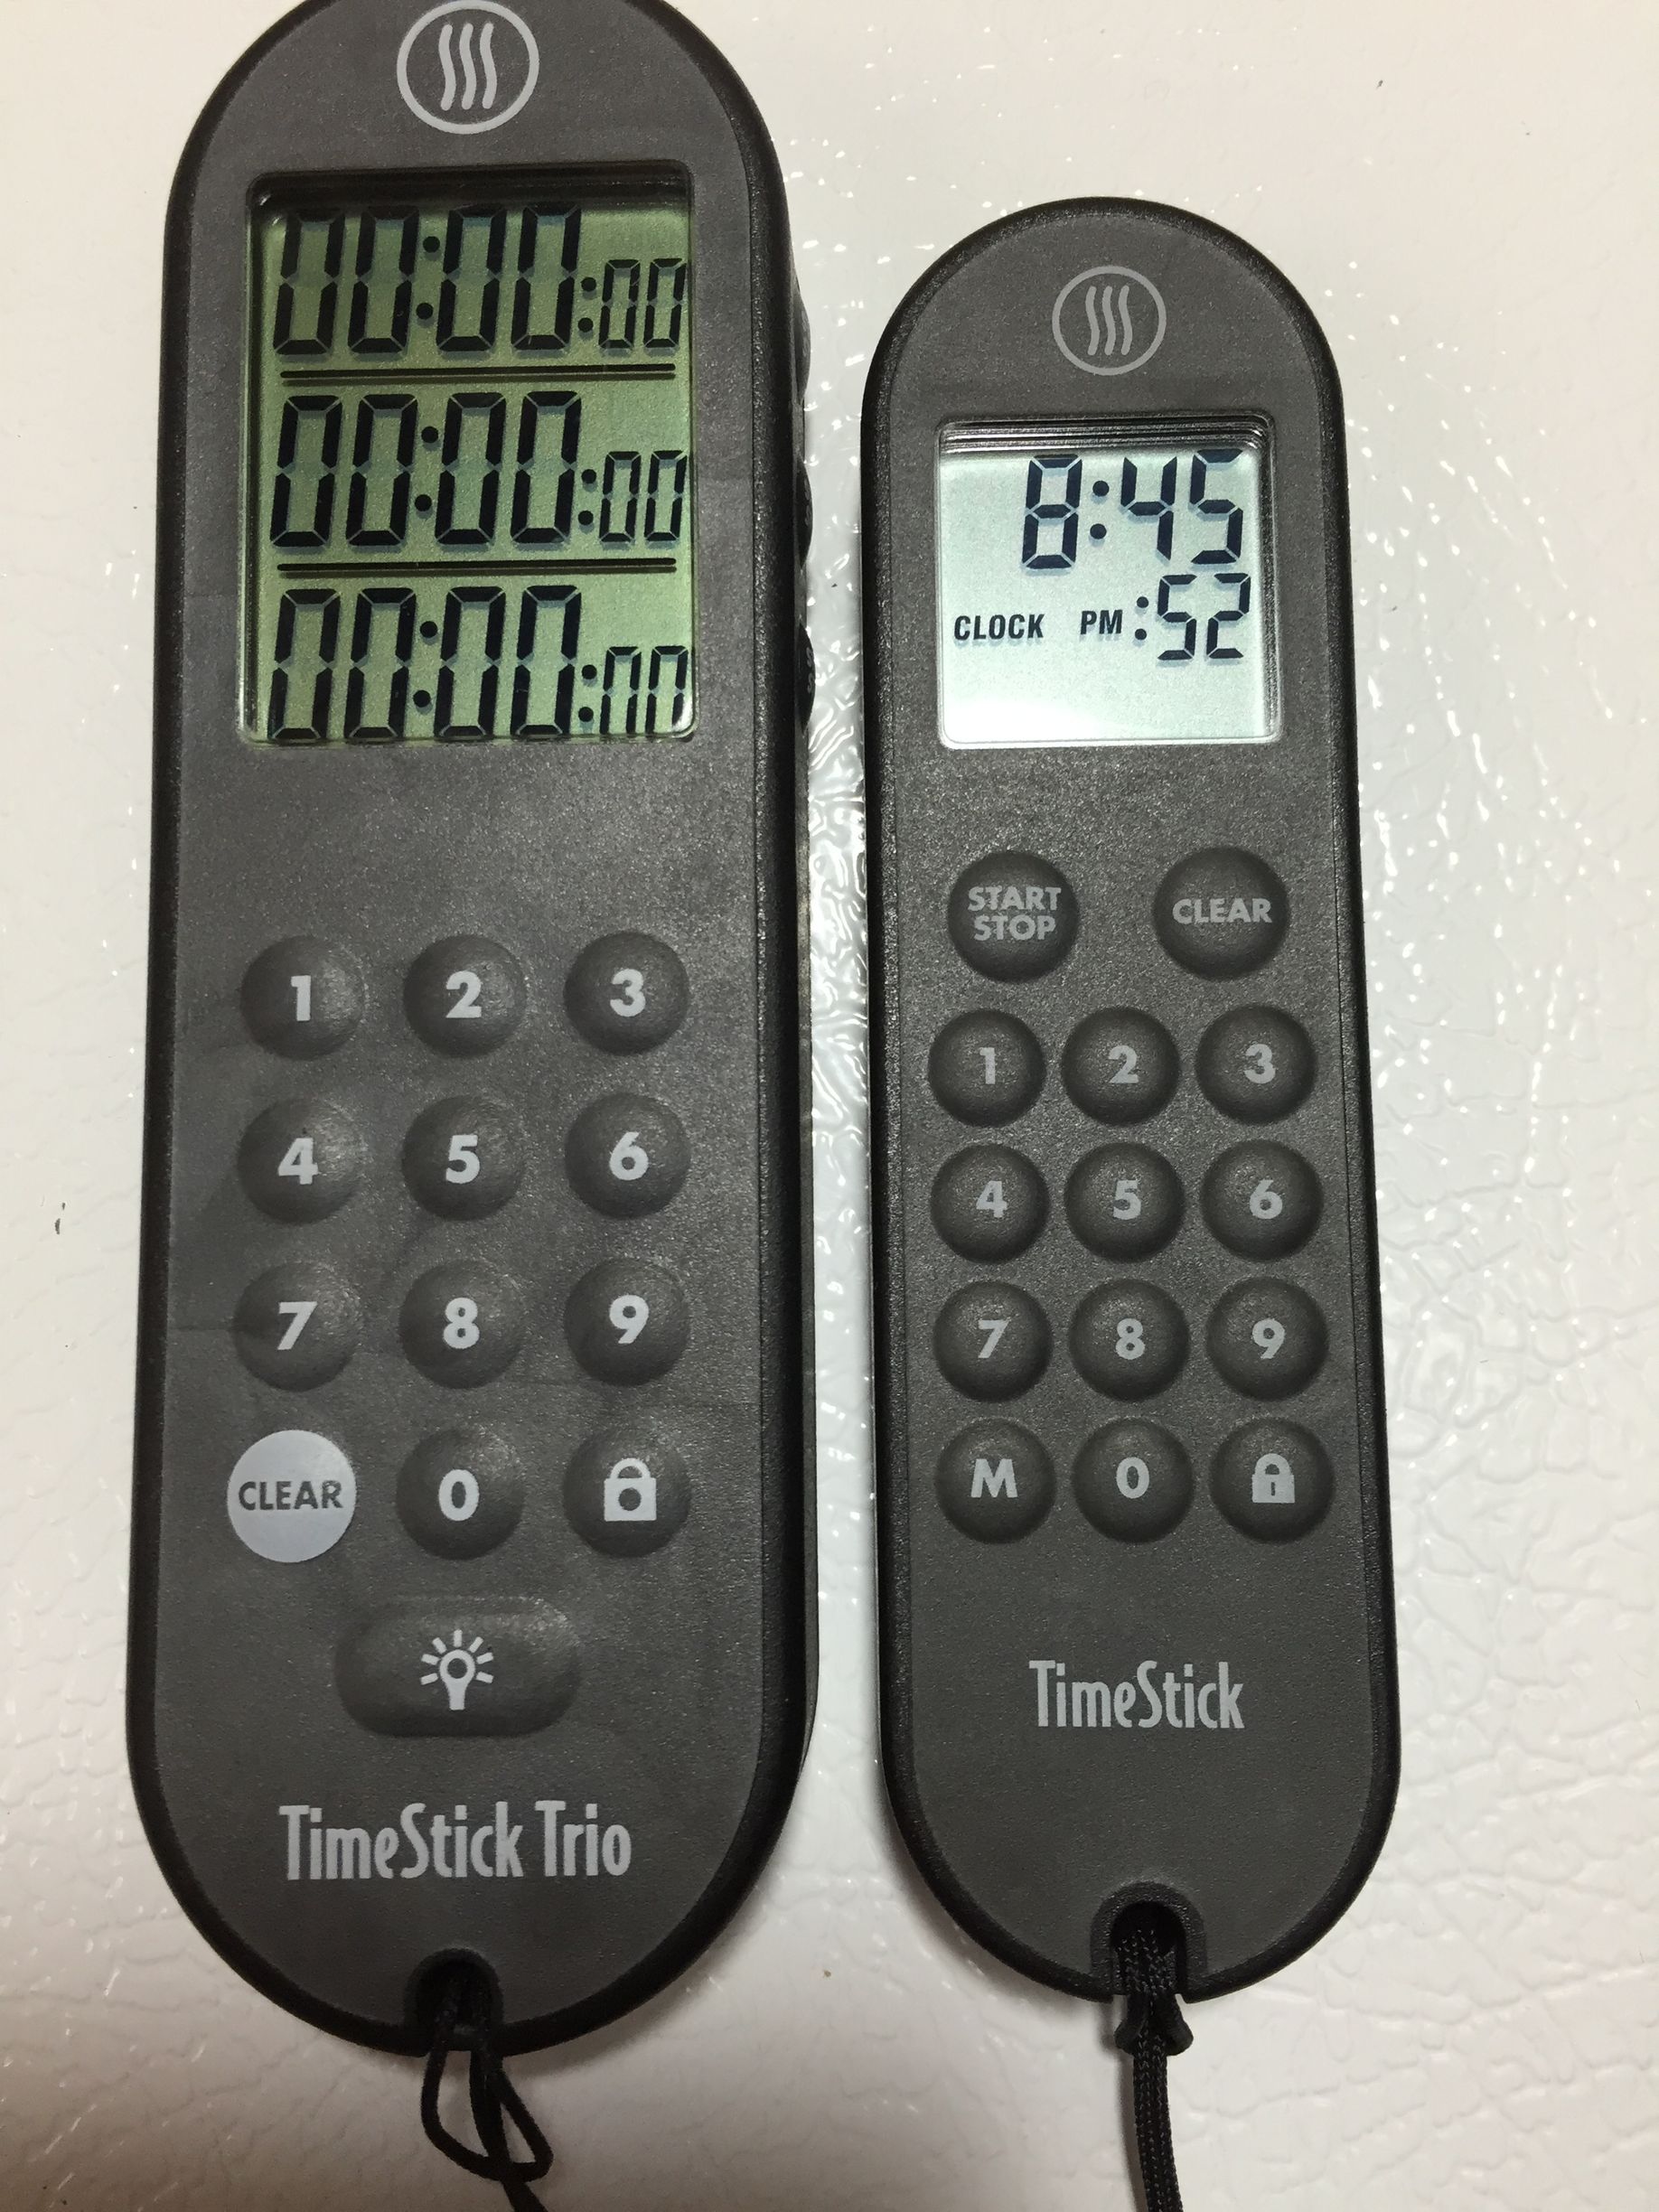 Product Review, ThermoWorks TimeStick Trio